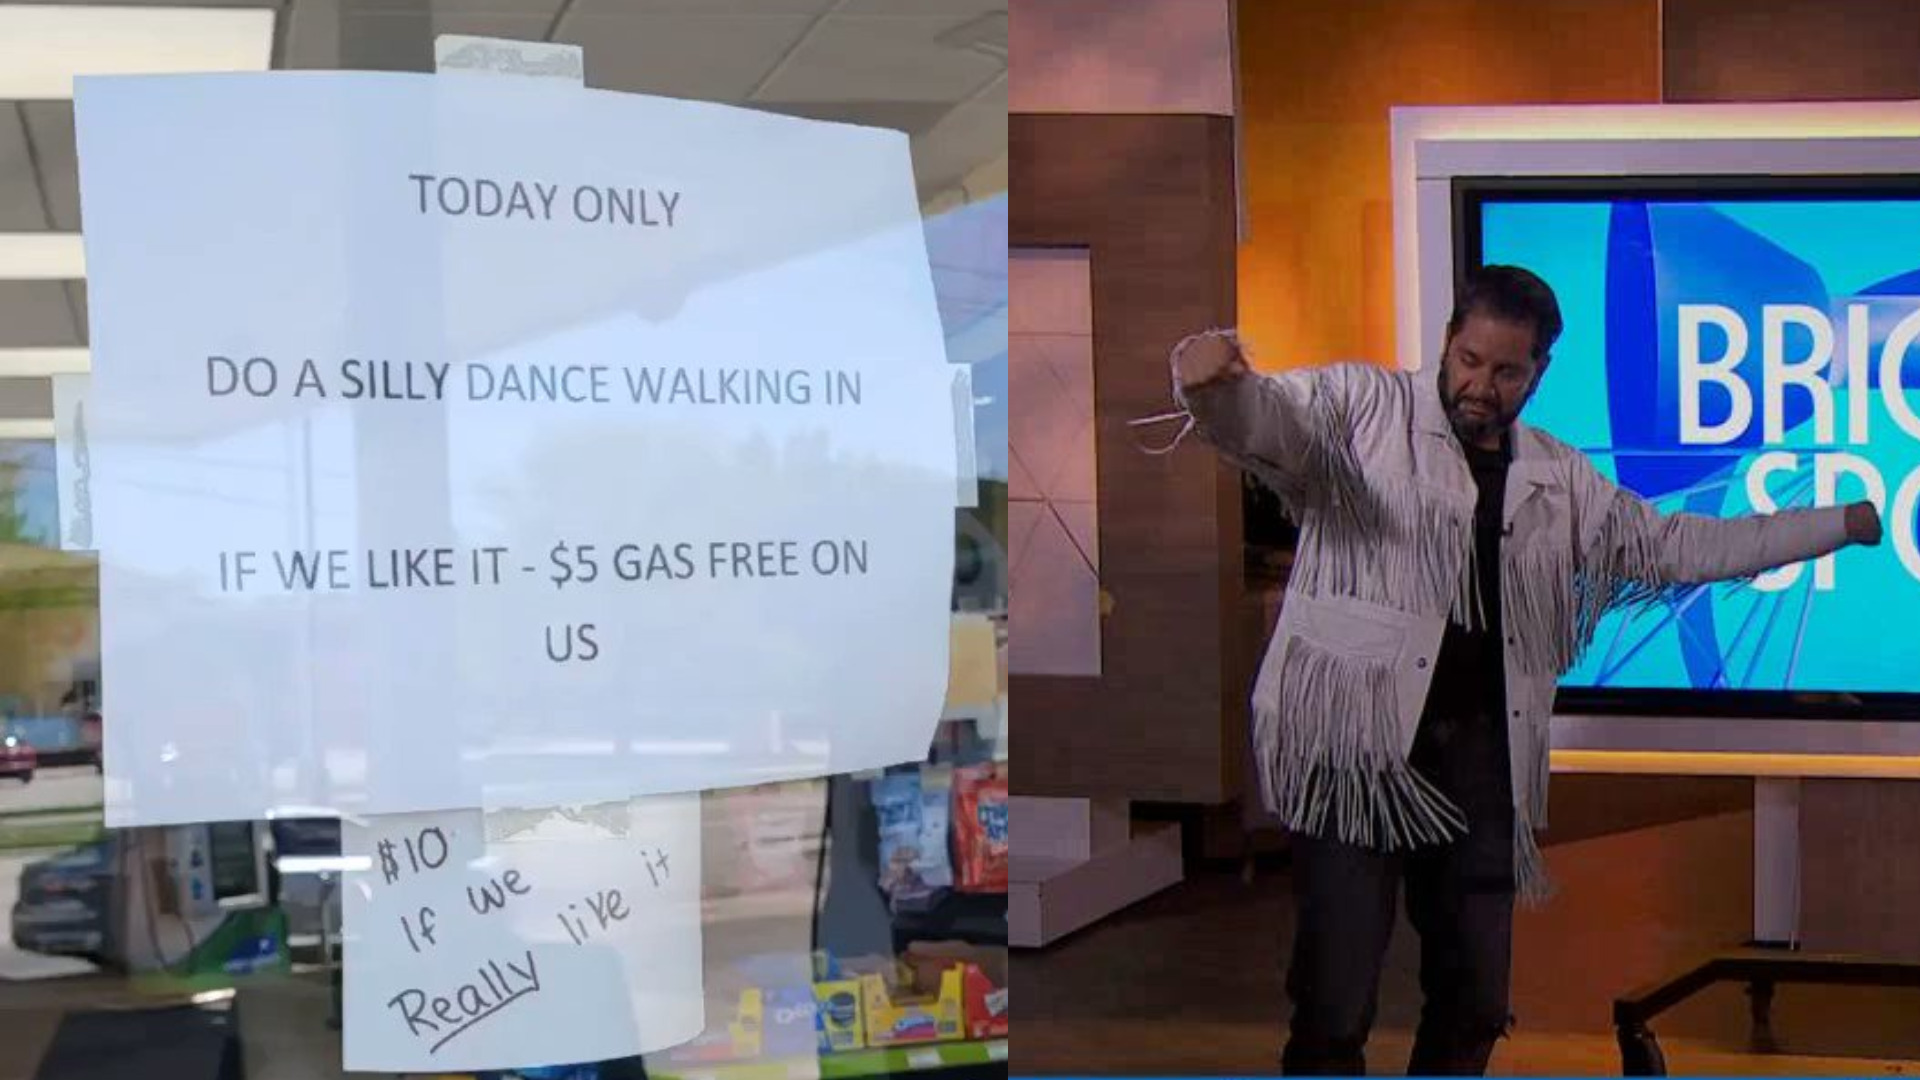 Discounts for dancing? That's what a local gas station was offering